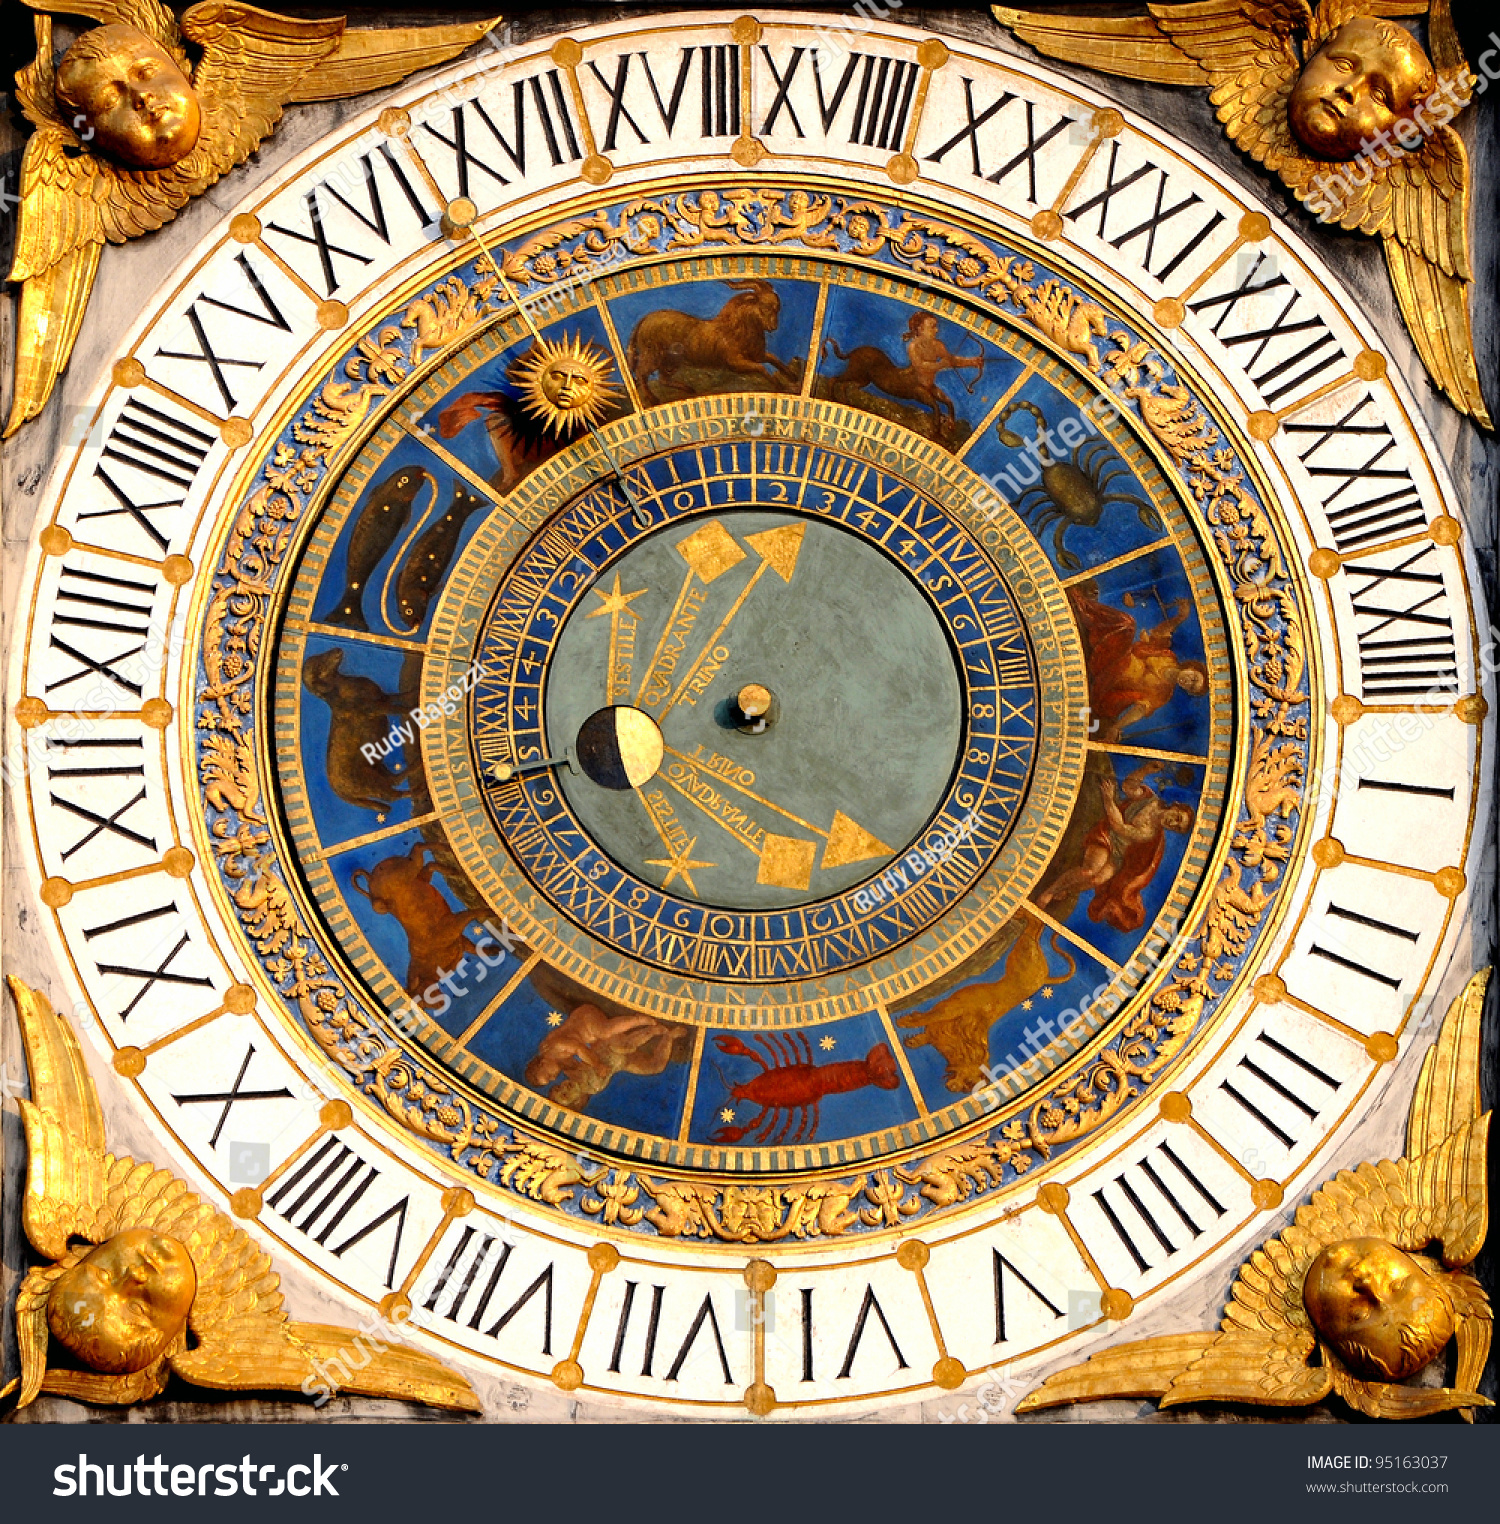 Renaissance Astronomical clock in Brescia, Italy (1540-50). Displays hours, moon phases and the zodiac. #95163037